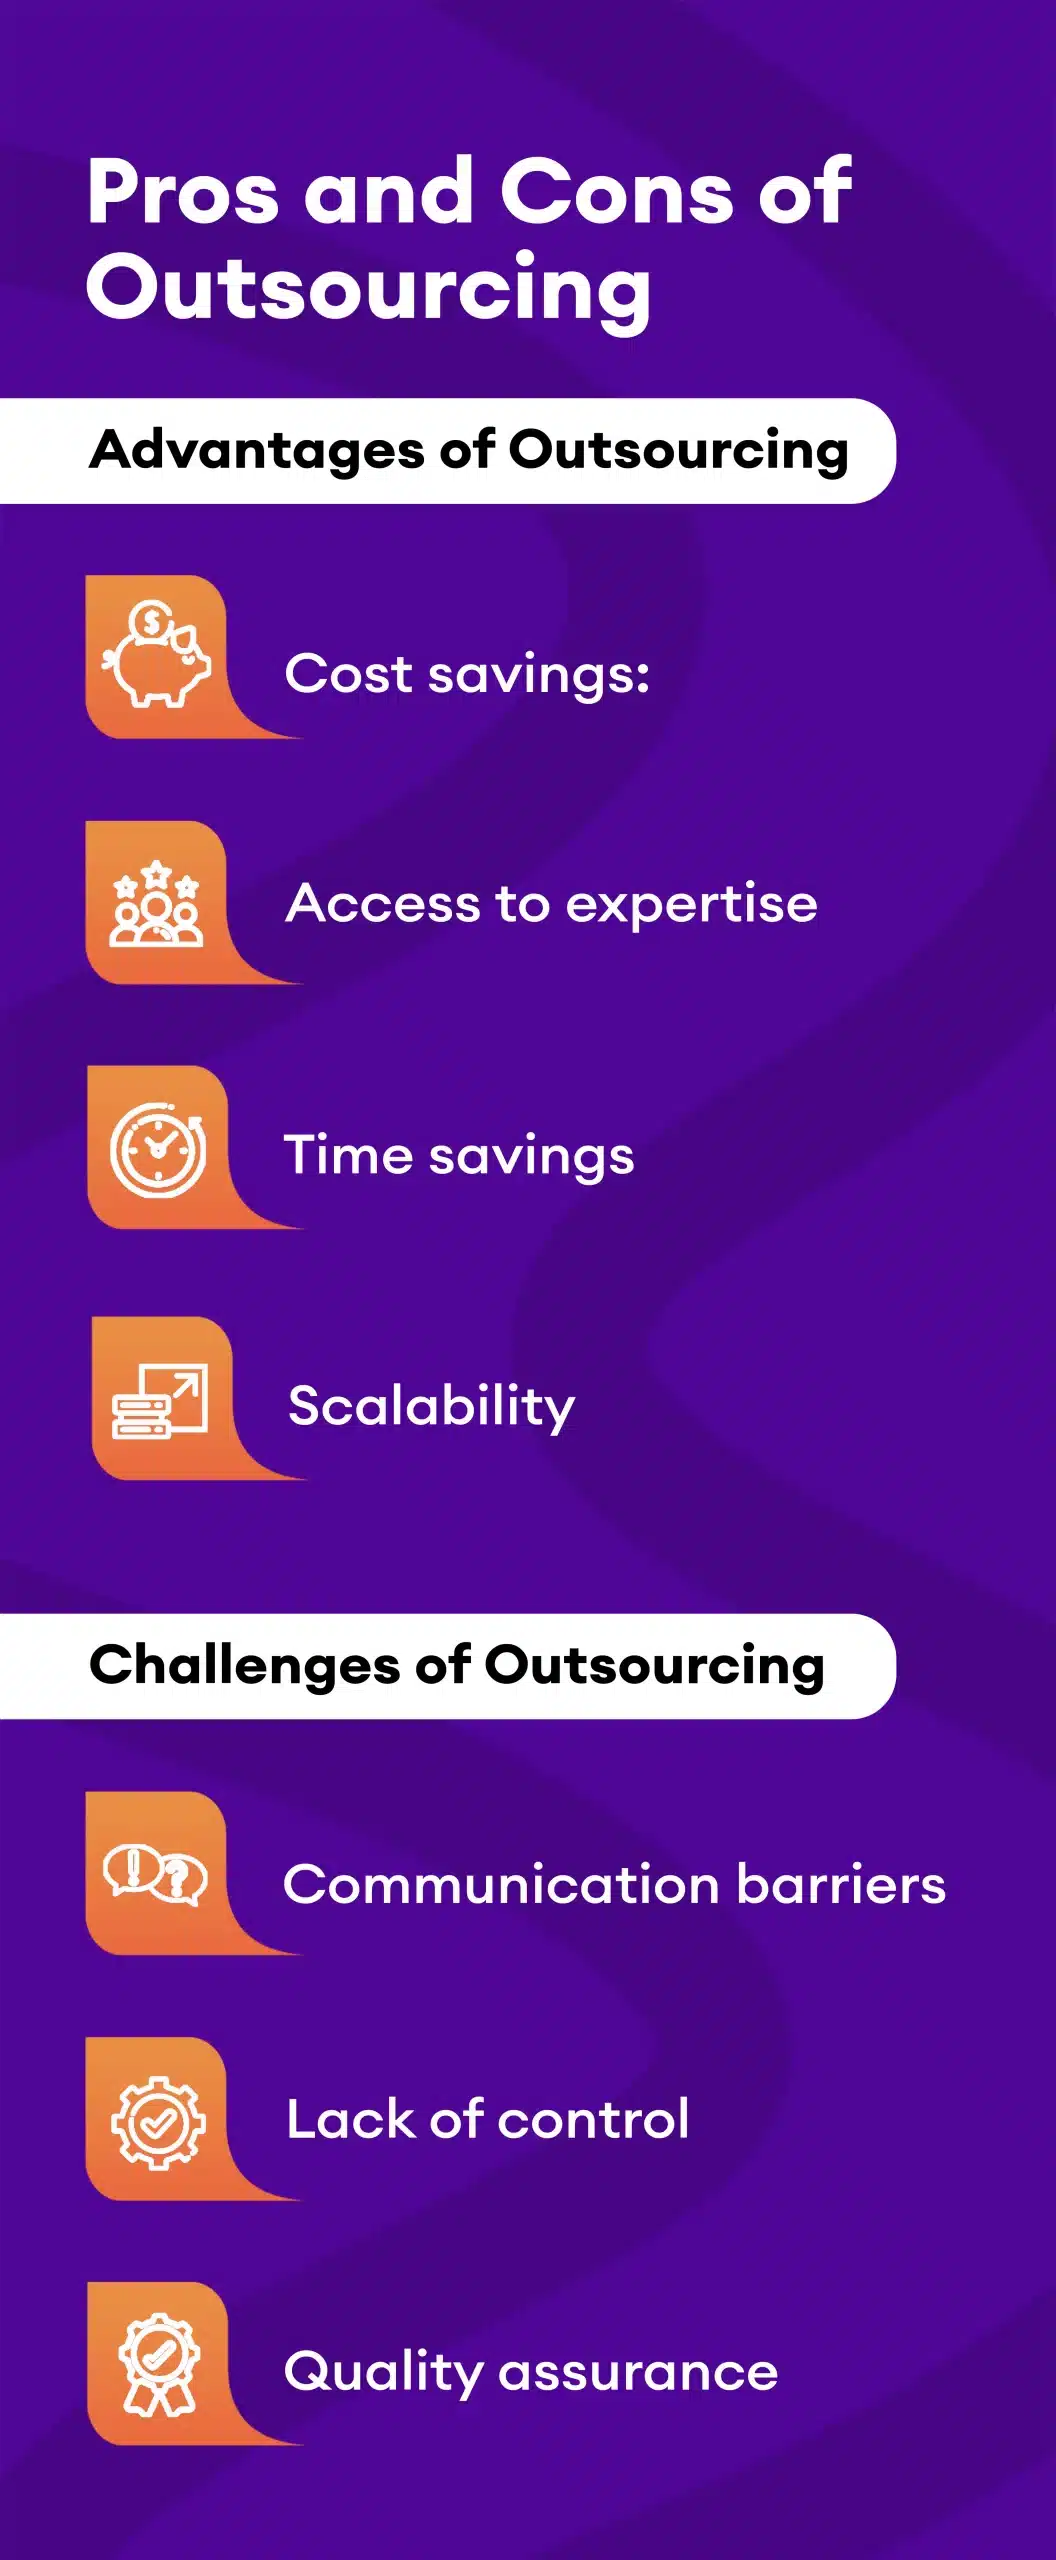 Pros and cons of outsourcing